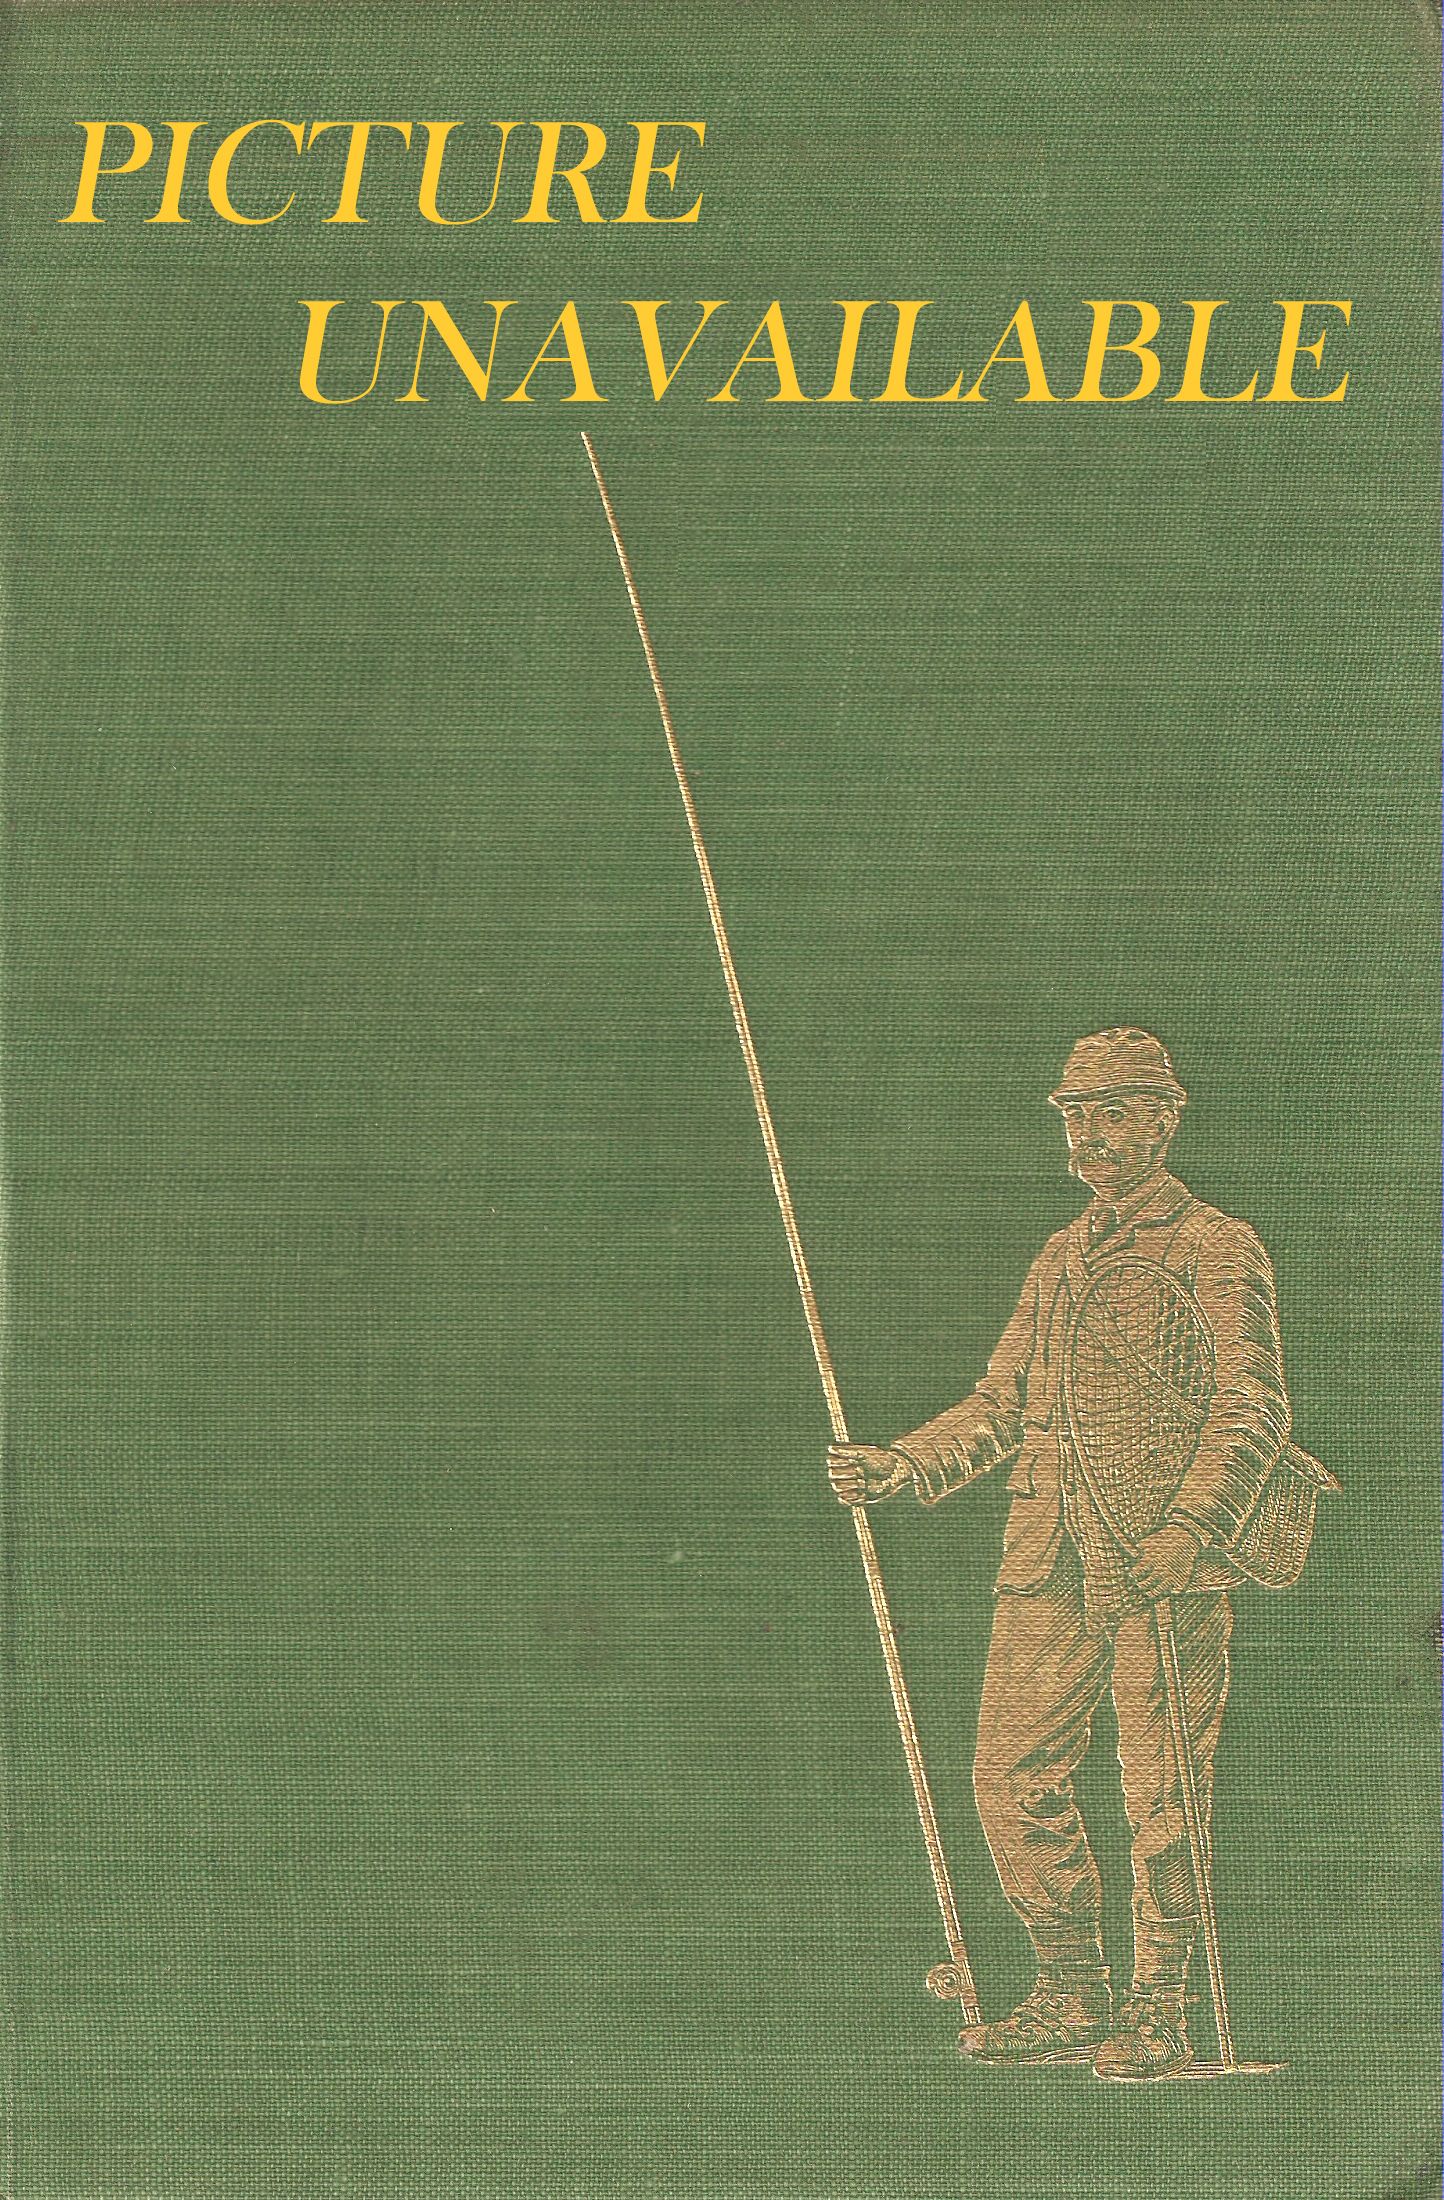 A FLY FISHER'S LIFE. By Charles Ritz. Revised and enarged edition prepared  in collaboration with John Piper. 1972 3rd edition.